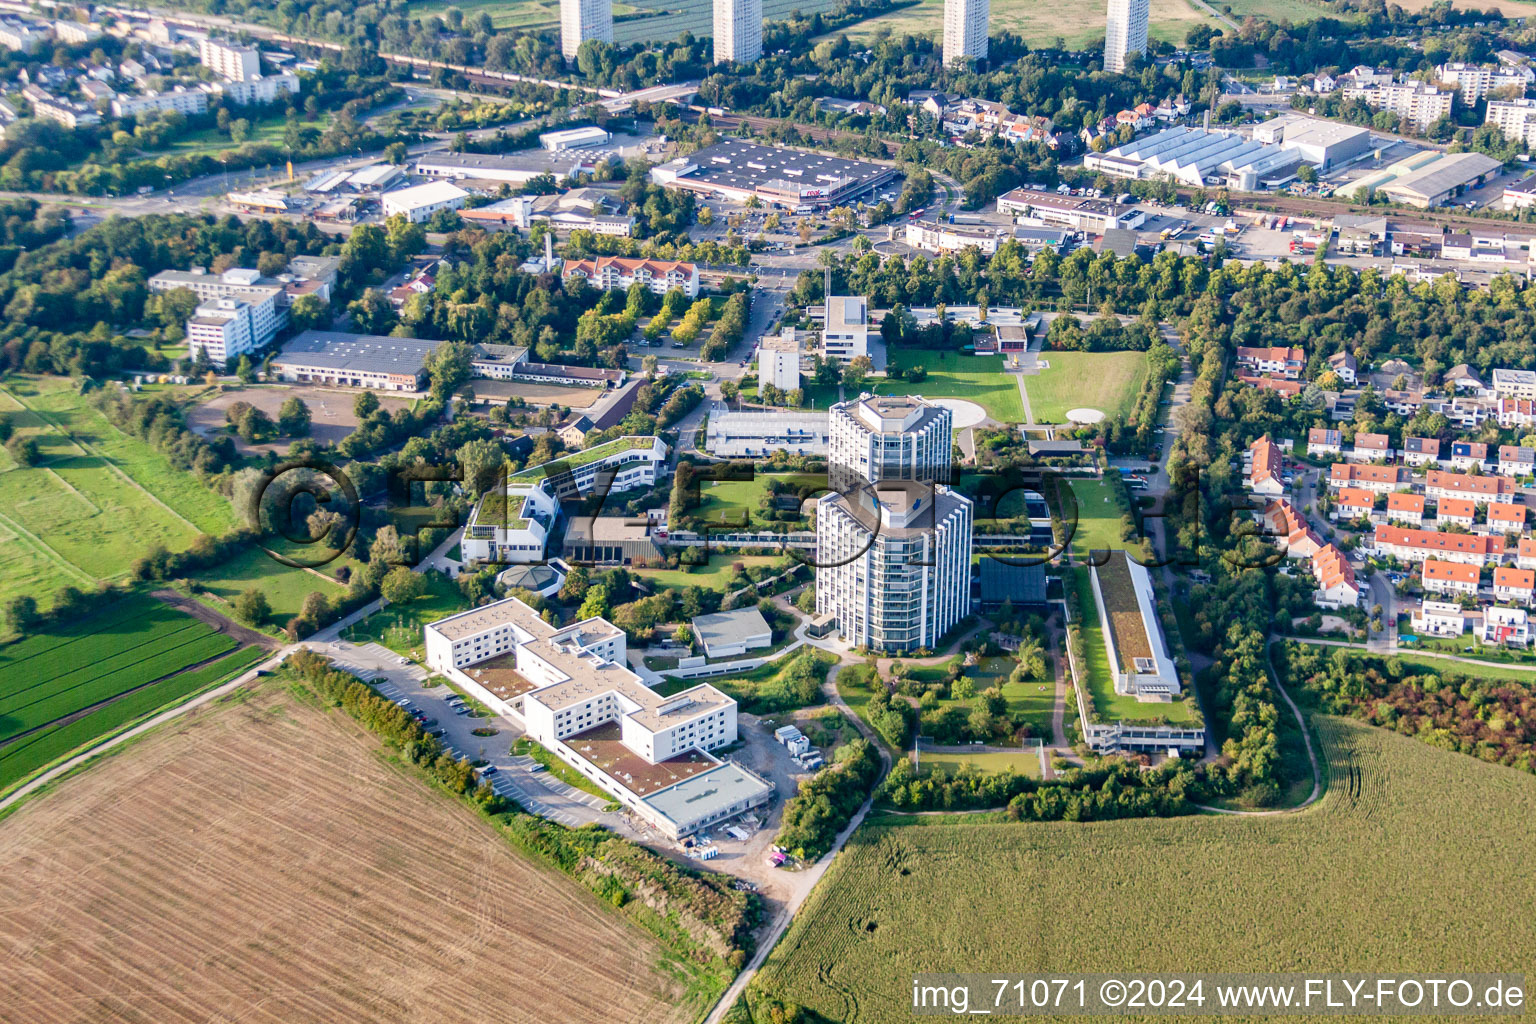 Aerial view of BG accident clinic in the district Oggersheim in Ludwigshafen am Rhein in the state Rhineland-Palatinate, Germany